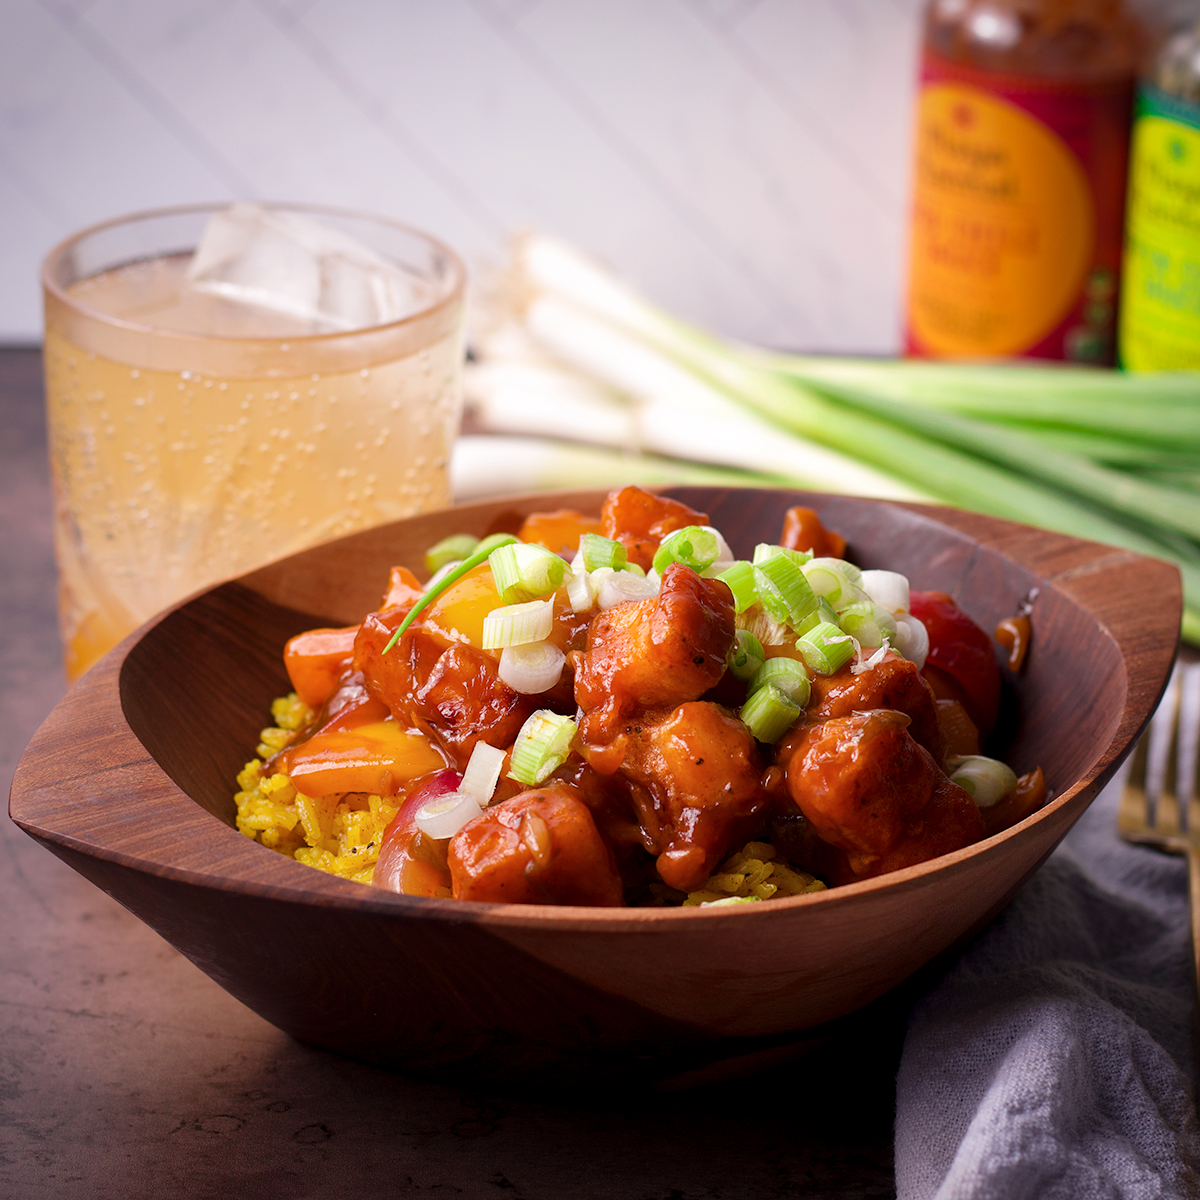 A wood bowl filled with rice and chilli paneer. In the background is a drinking glass filled with soda, green onions, and a couple of different kinds of hot sauce.